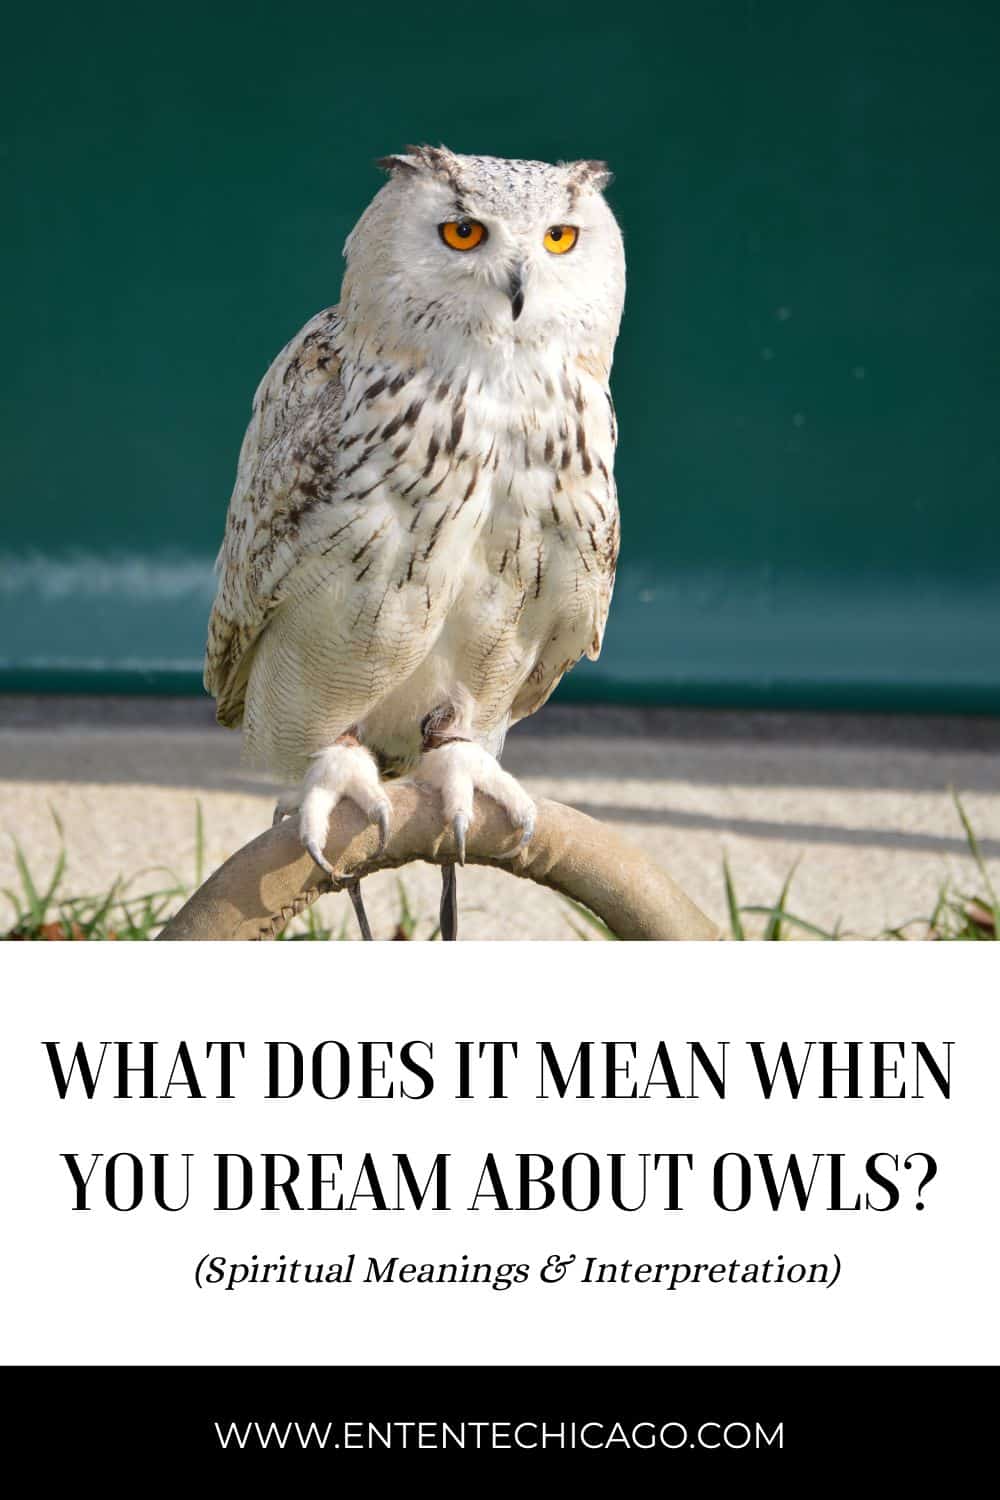 What Does It Mean When You Dream About Owls? (13 Spiritual Meanings)